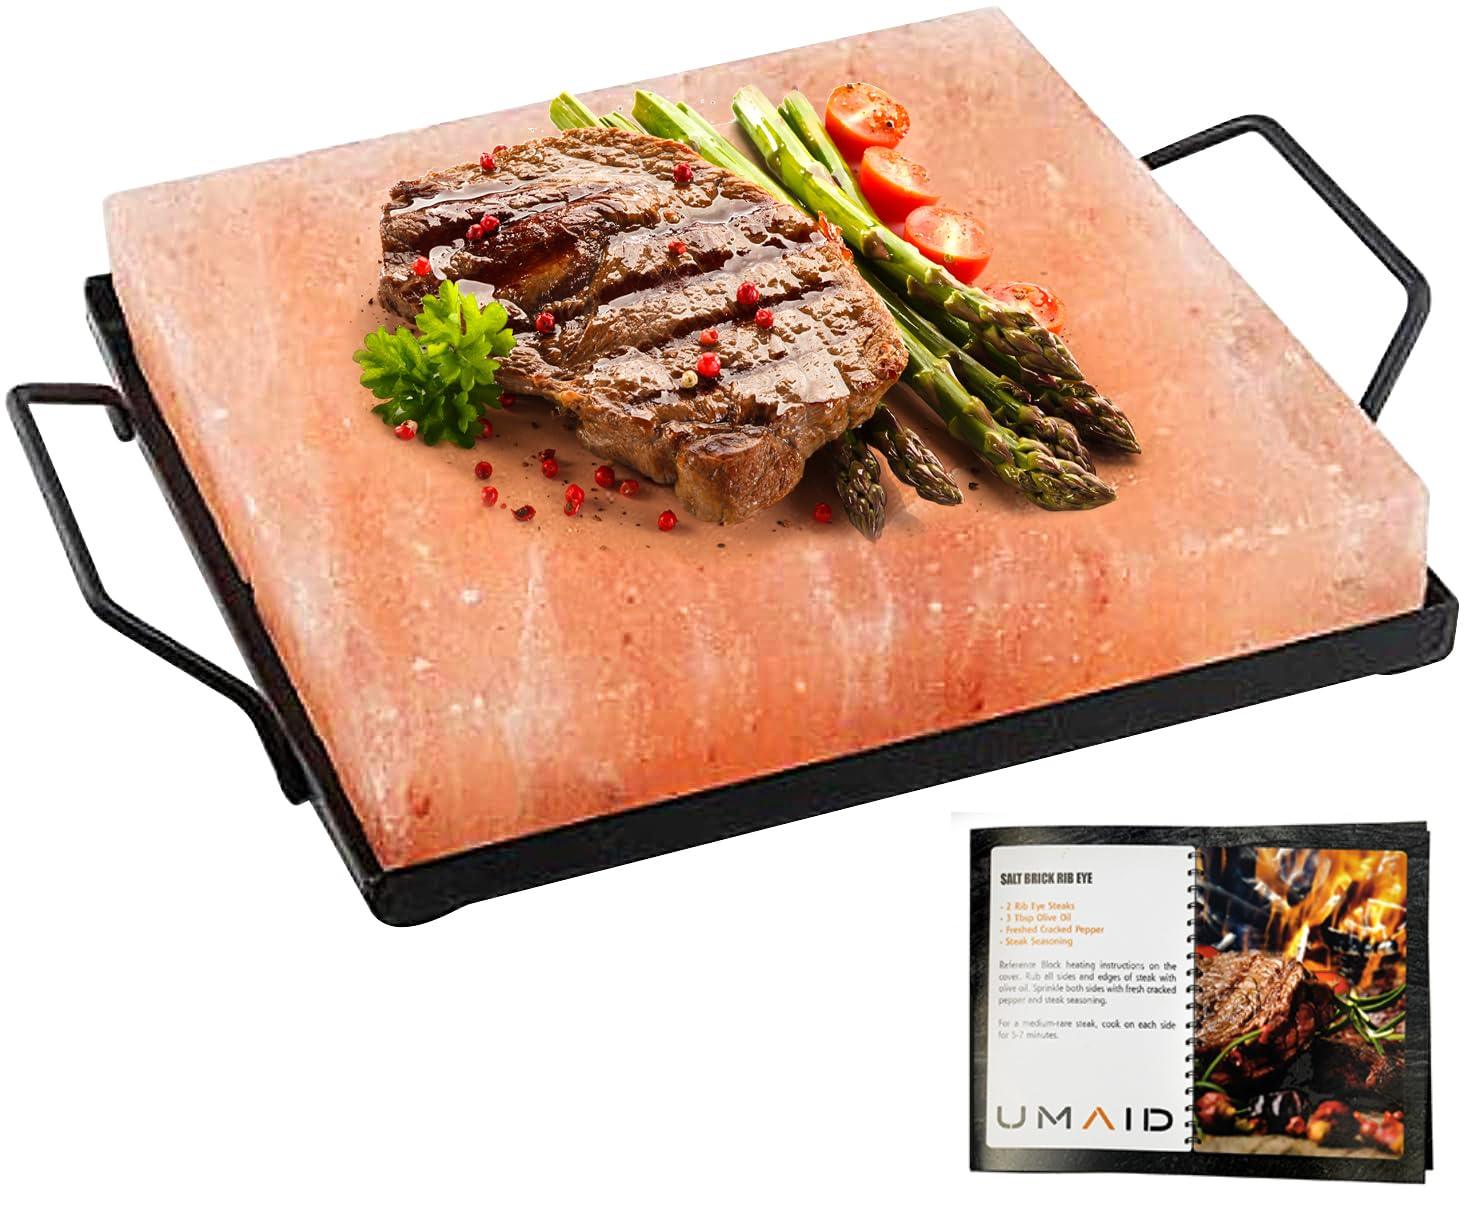 UMAID Himalayan Salt Block Cooking Plate 8x8x1.5 for Cooking, Grilling, Cutting and Serving, Food Grade Rock Salt Stone On Steel Tray with Recipe Pamphlet Unique Gifts for Men, Women, Dads & Cooks - CookCave